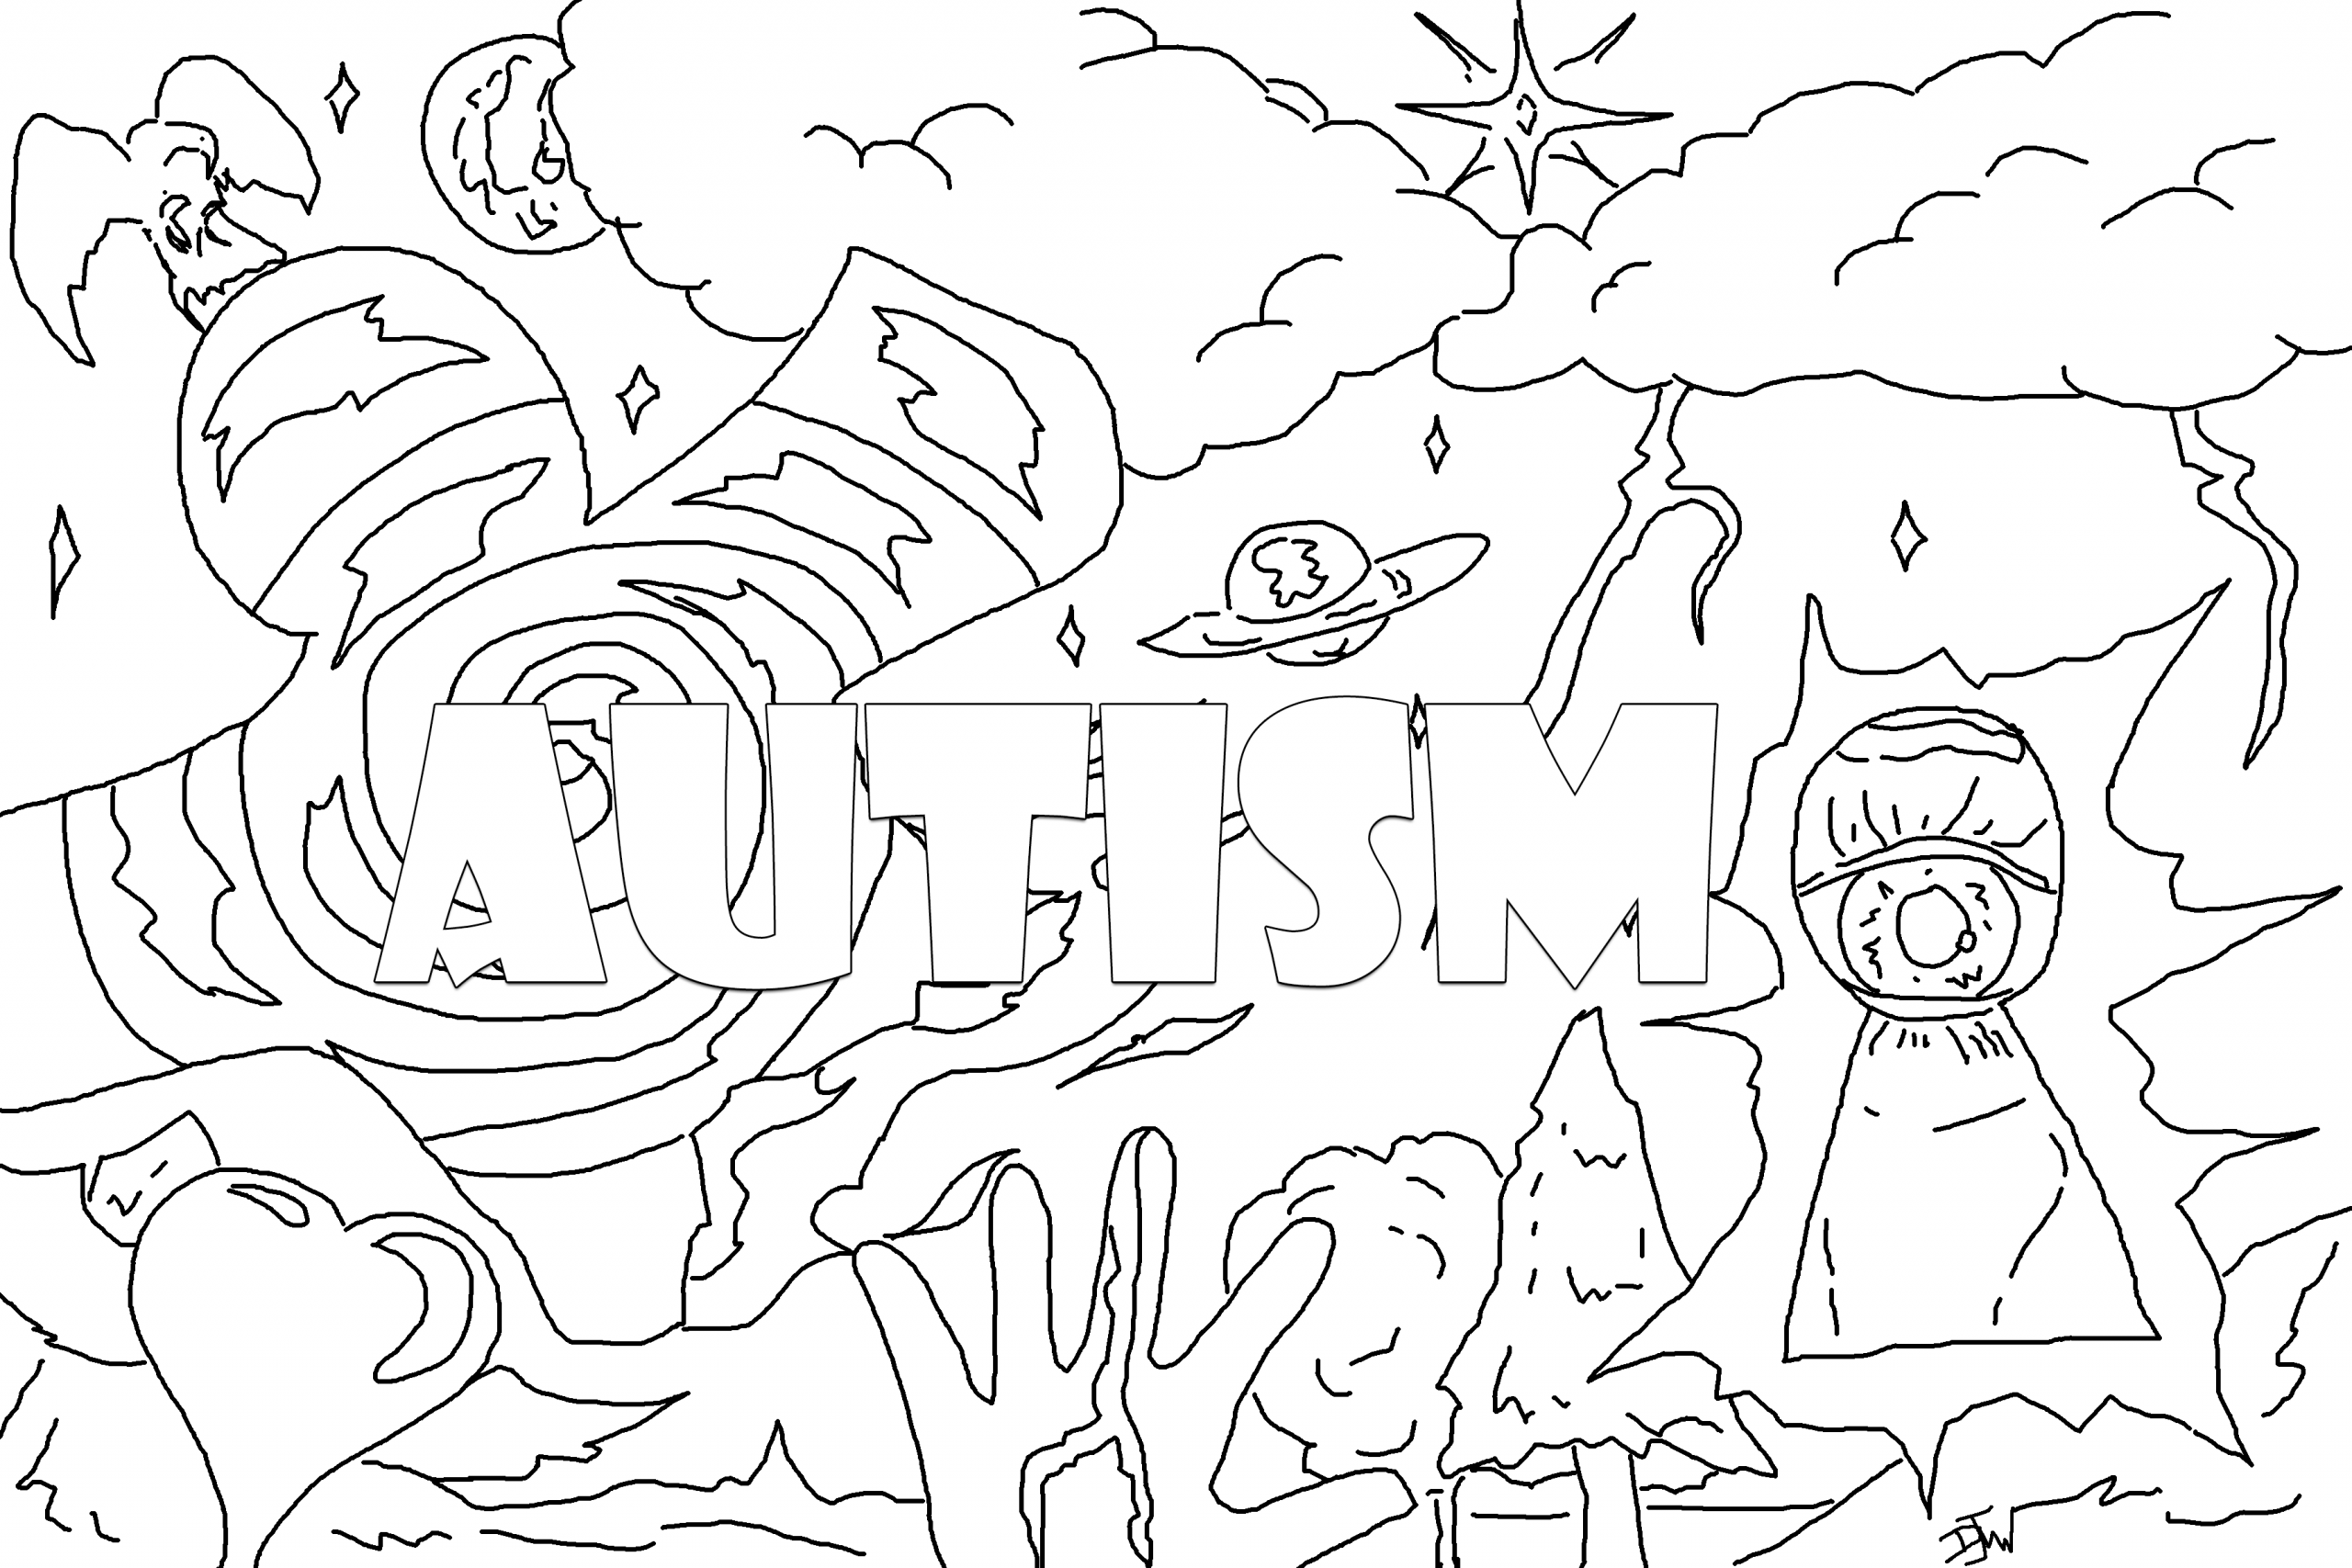 Autism Awareness Coloring Pages - Coloring Home